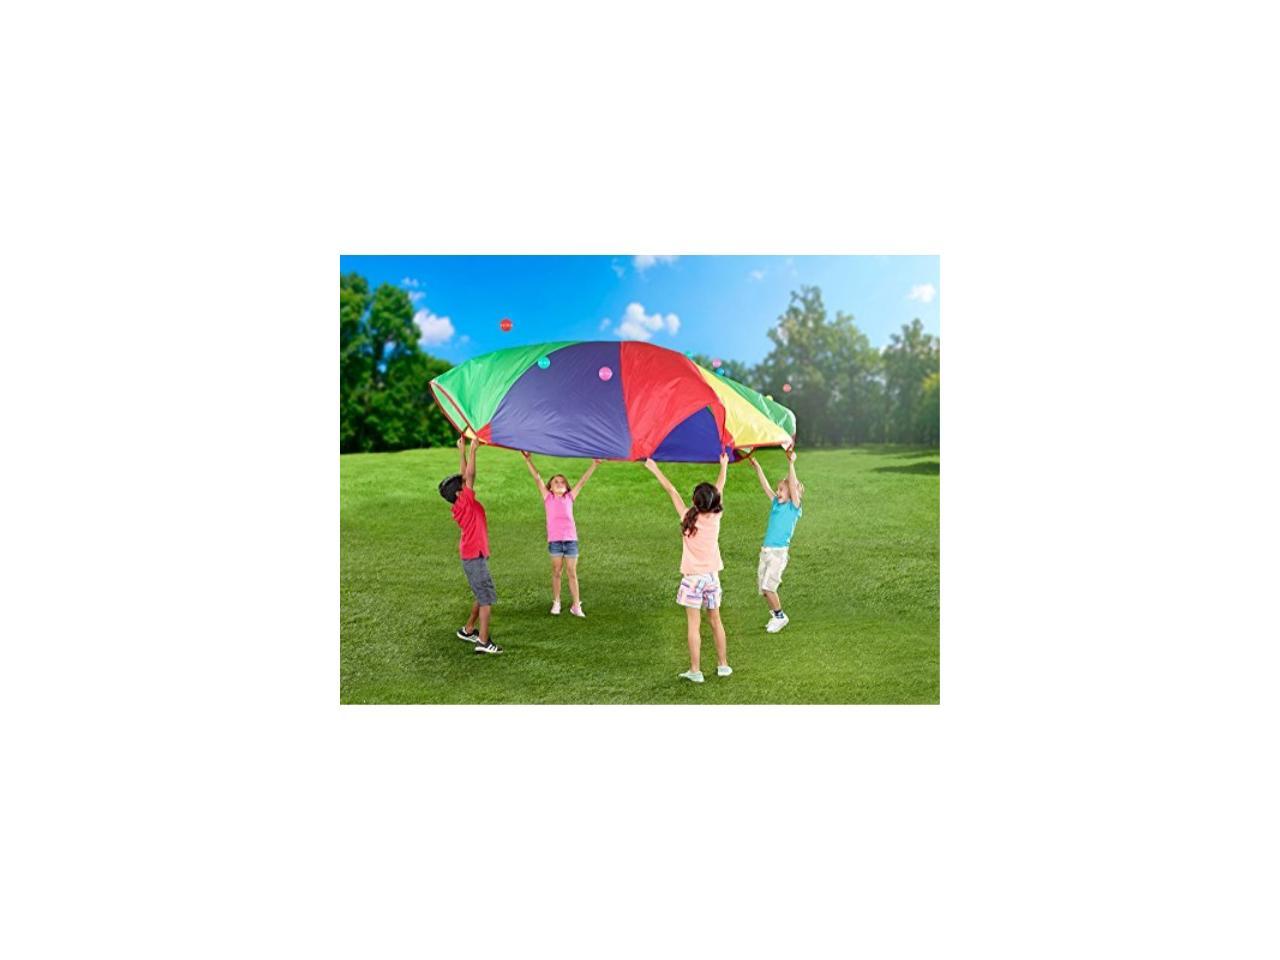 Details about   POCO DIVO 12-Foot Play Parachute Kids Canopy Children Wind Tent With 8 Handles 